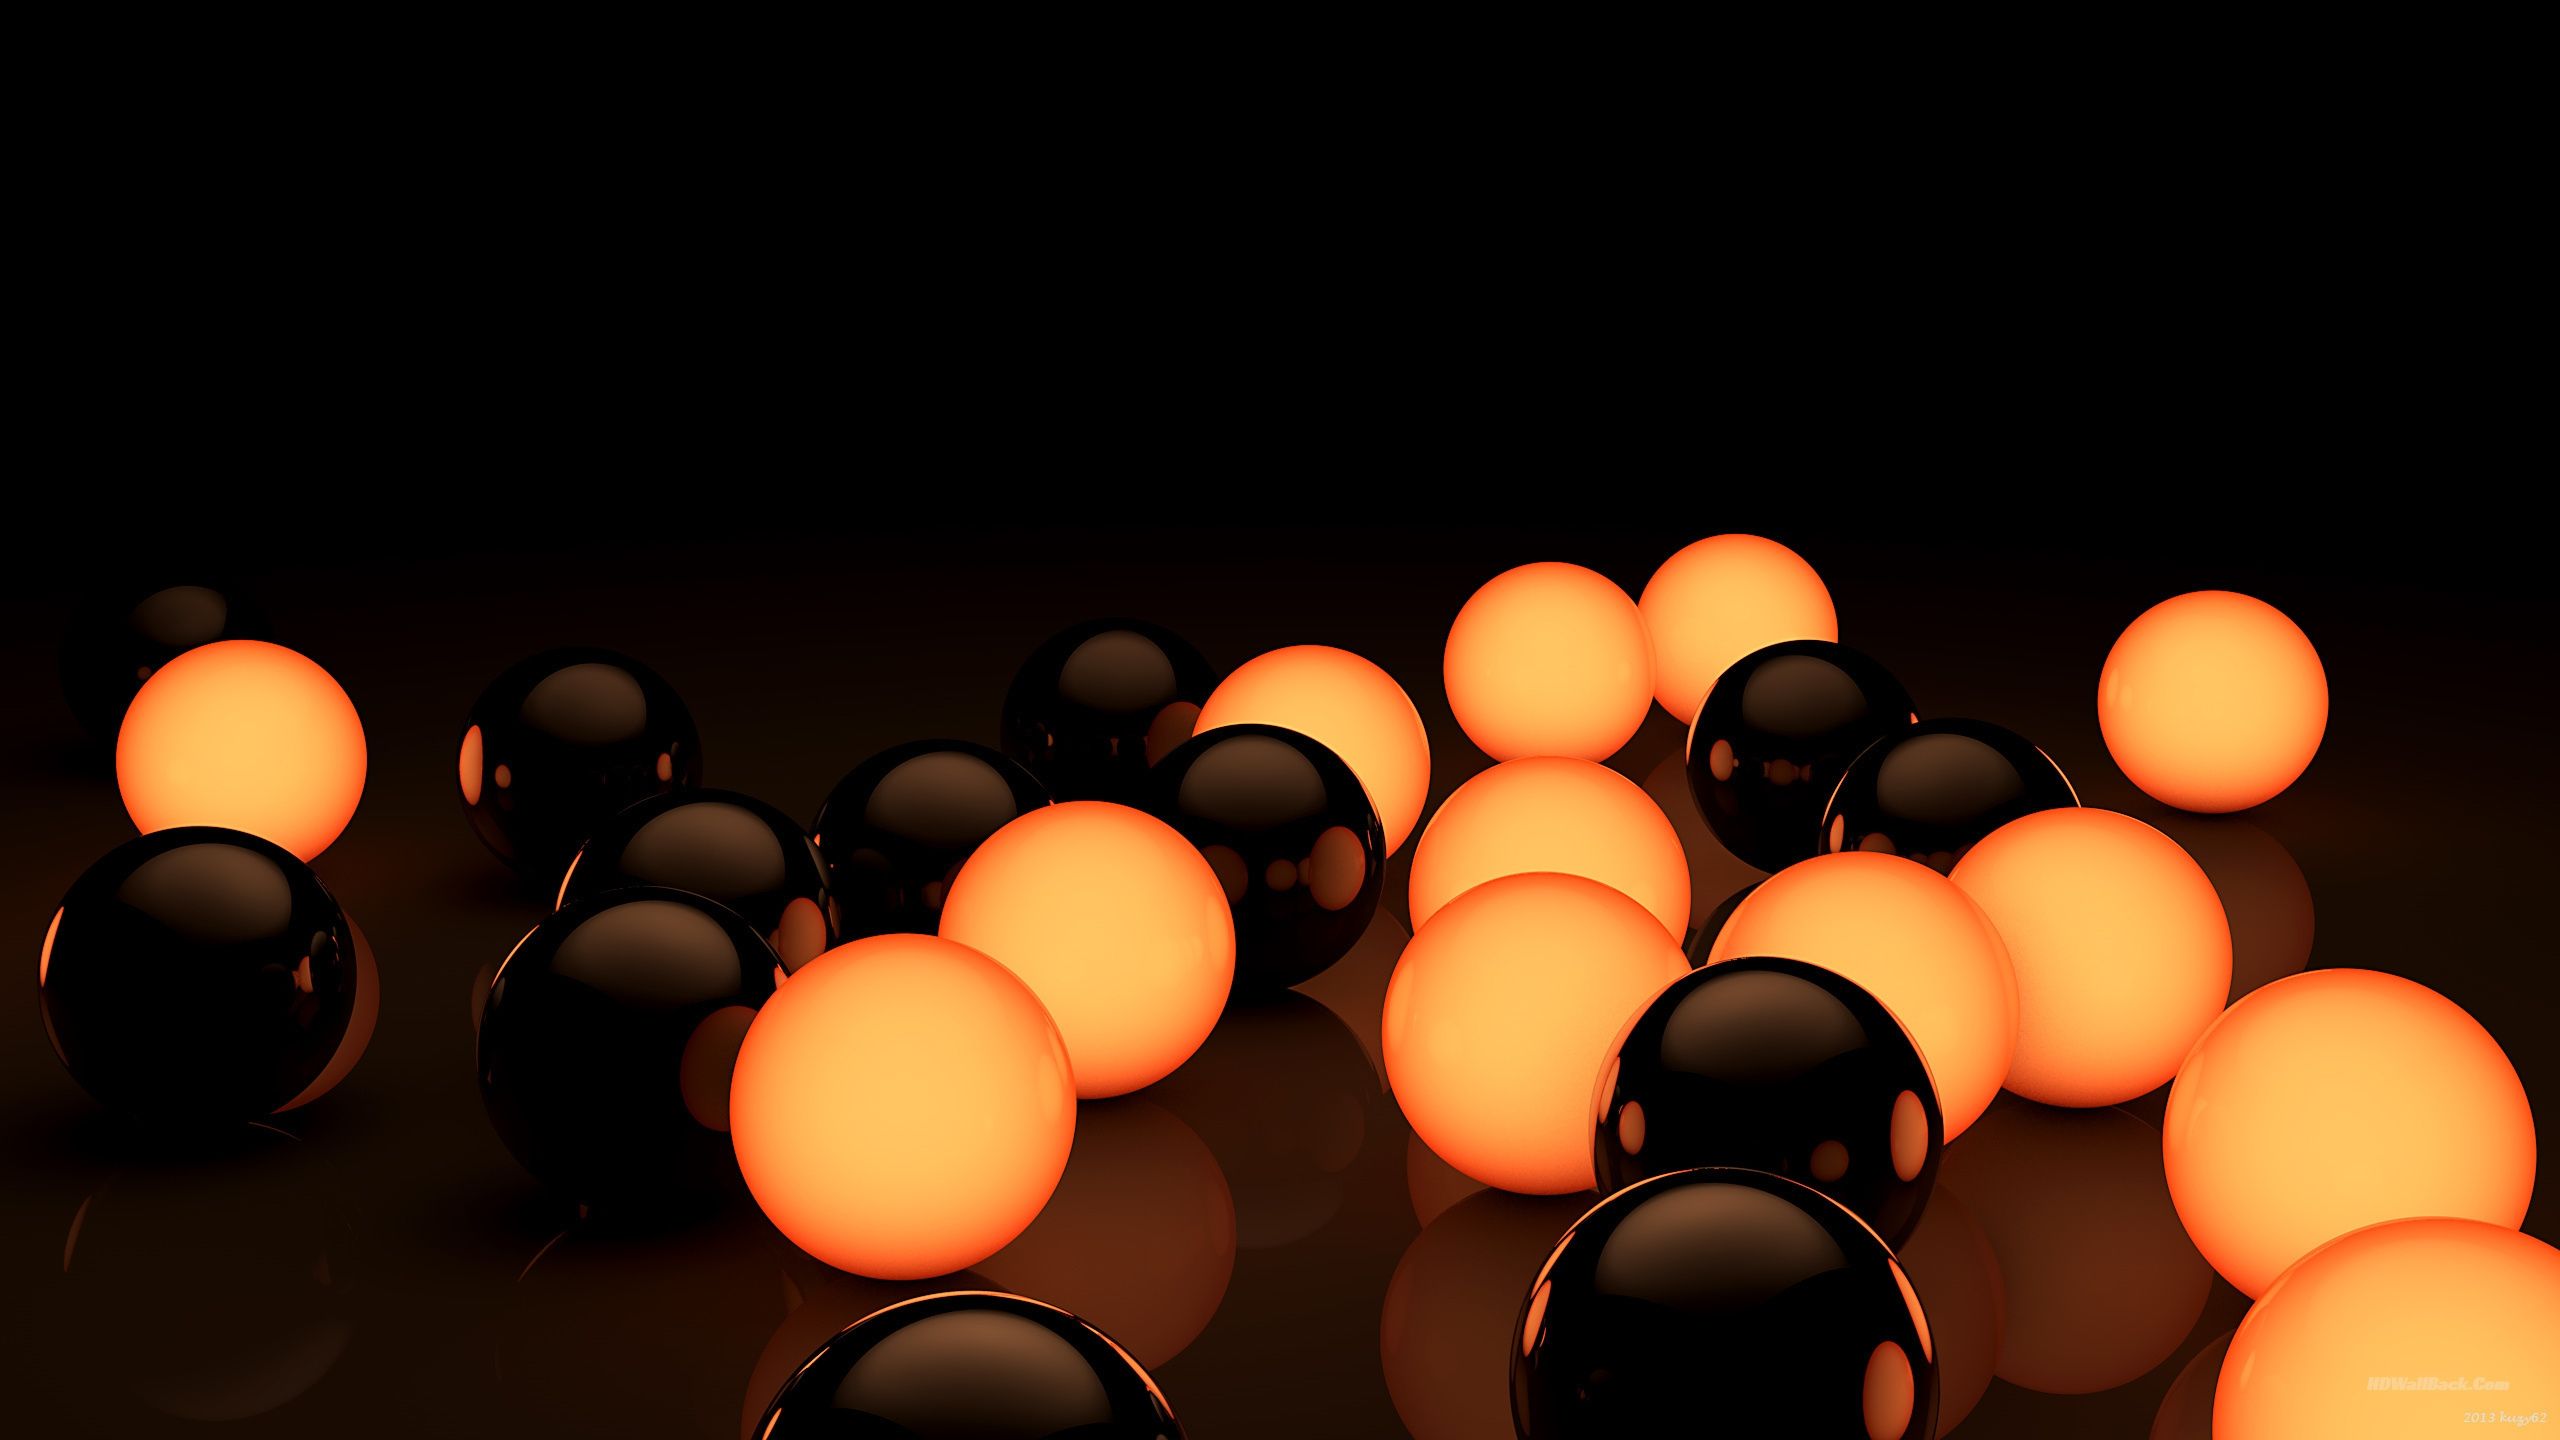 3D Orange and Black Wallpaper HD. HD Wallpaper, HD Background, Tumblr Background, Image, Picture